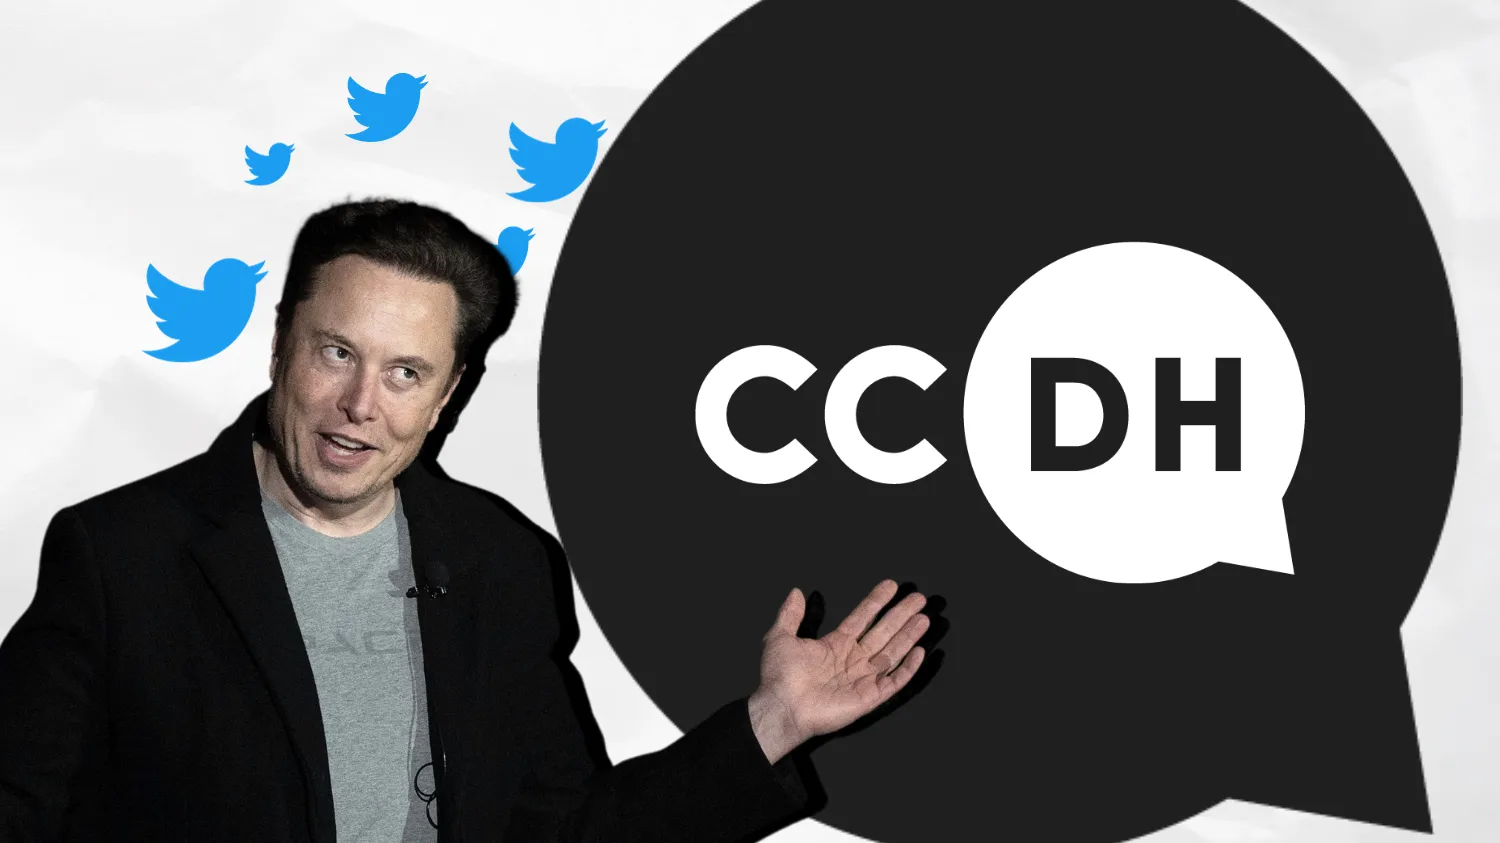 Musk picture next to CCDH's logo